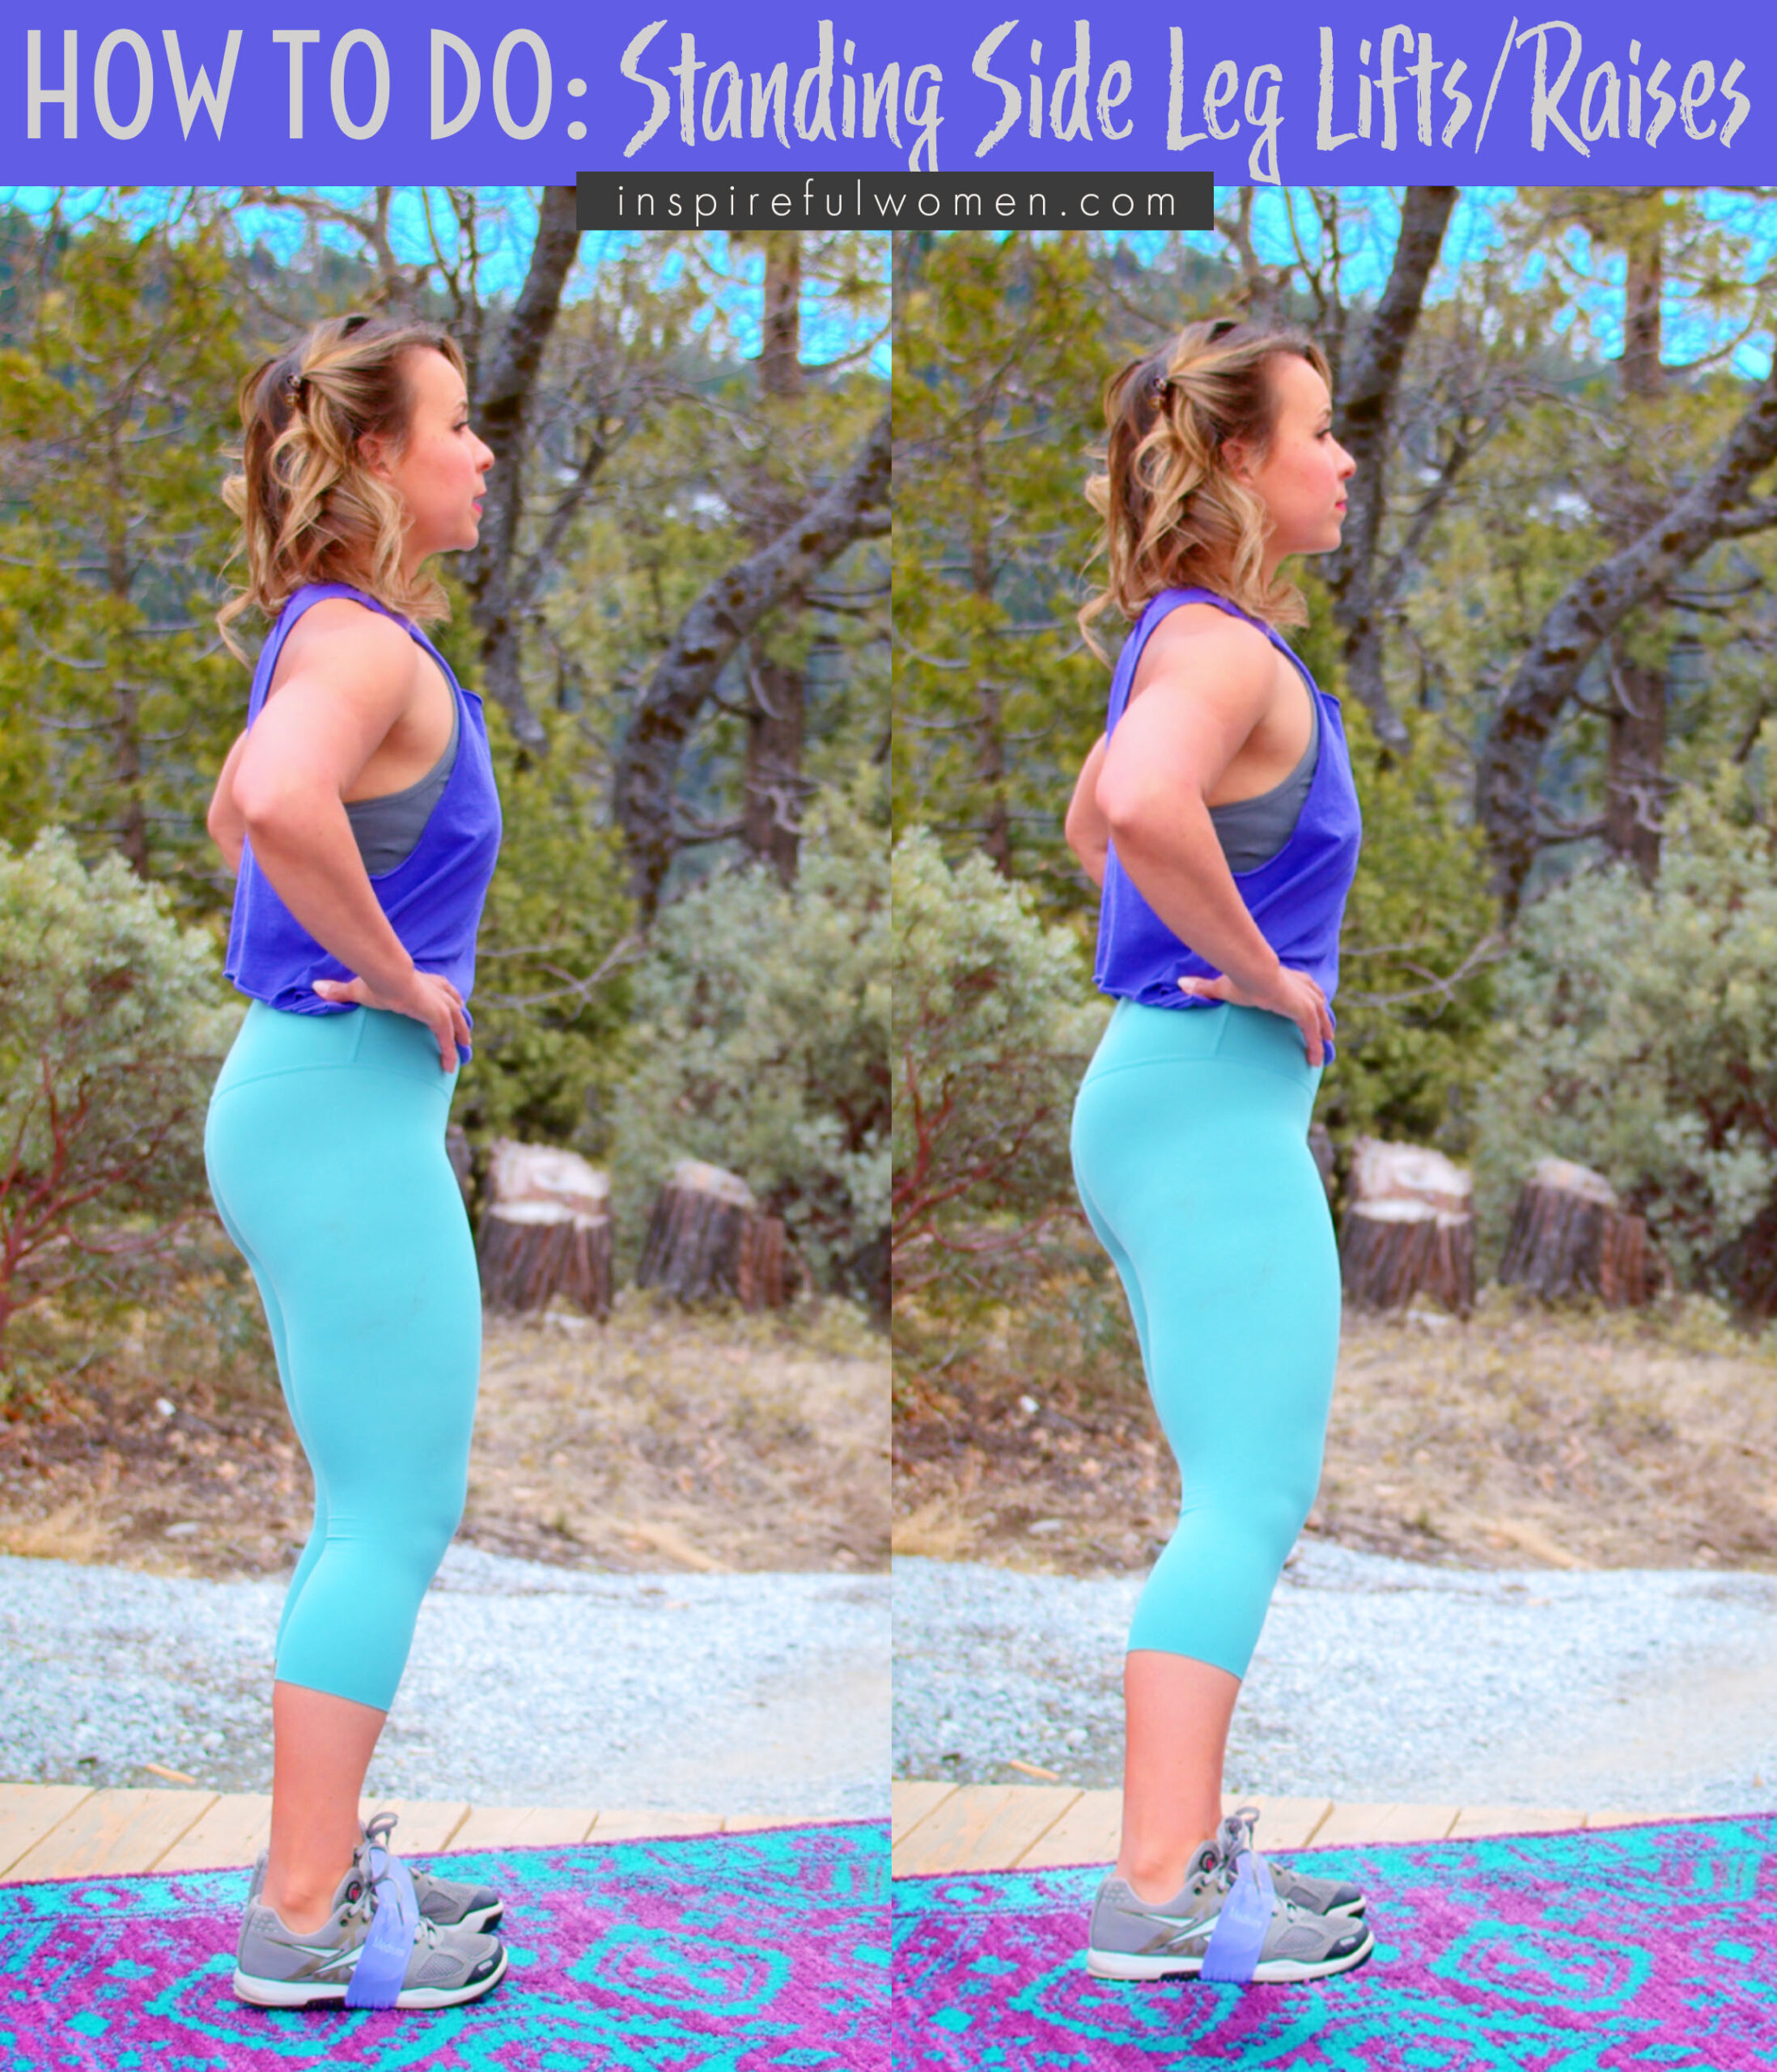 how-to-do-standing-side-leg-raises-glutes-workout-at-home-women-over-40